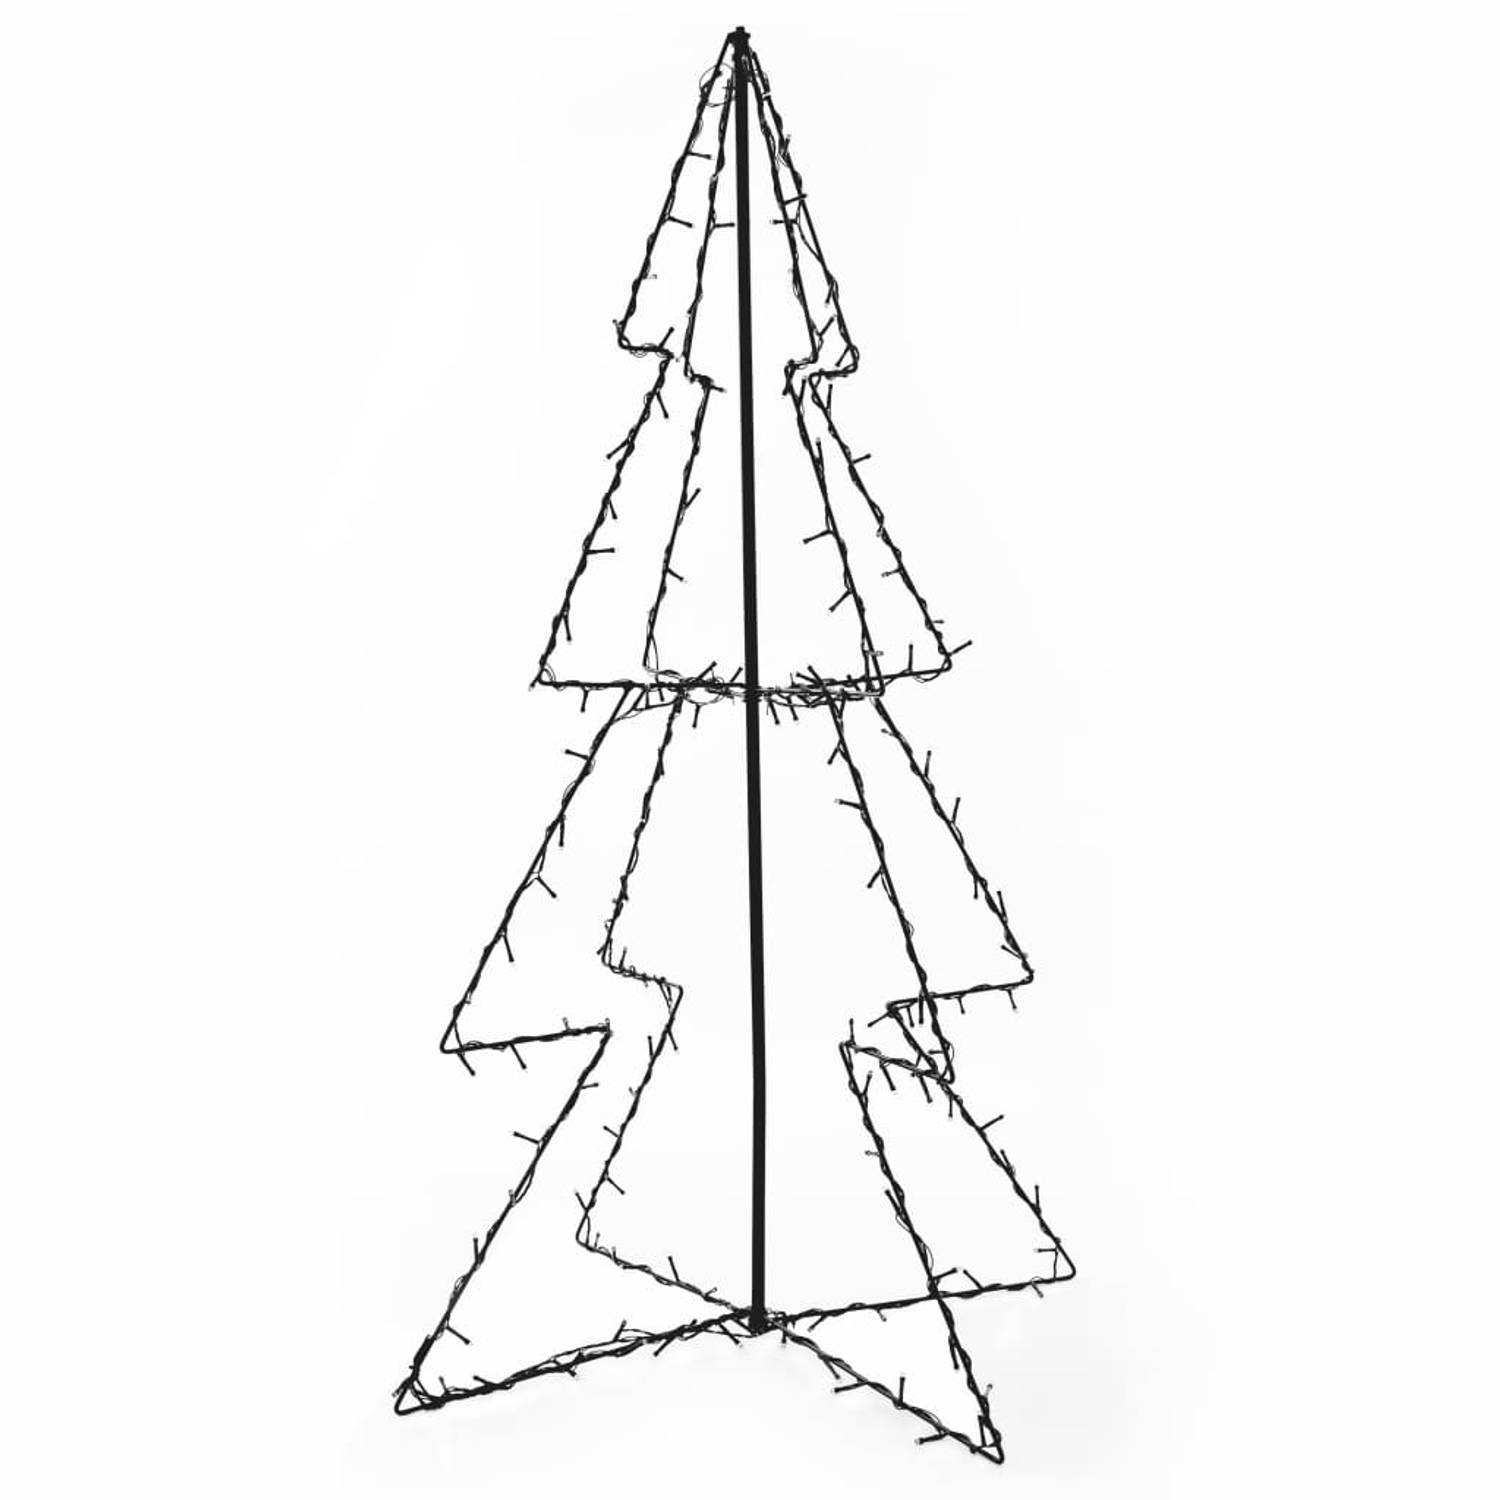 The Living Store Kerstboomverlichting LED 160 LEDs 78 x 120 cm Waterbestendig